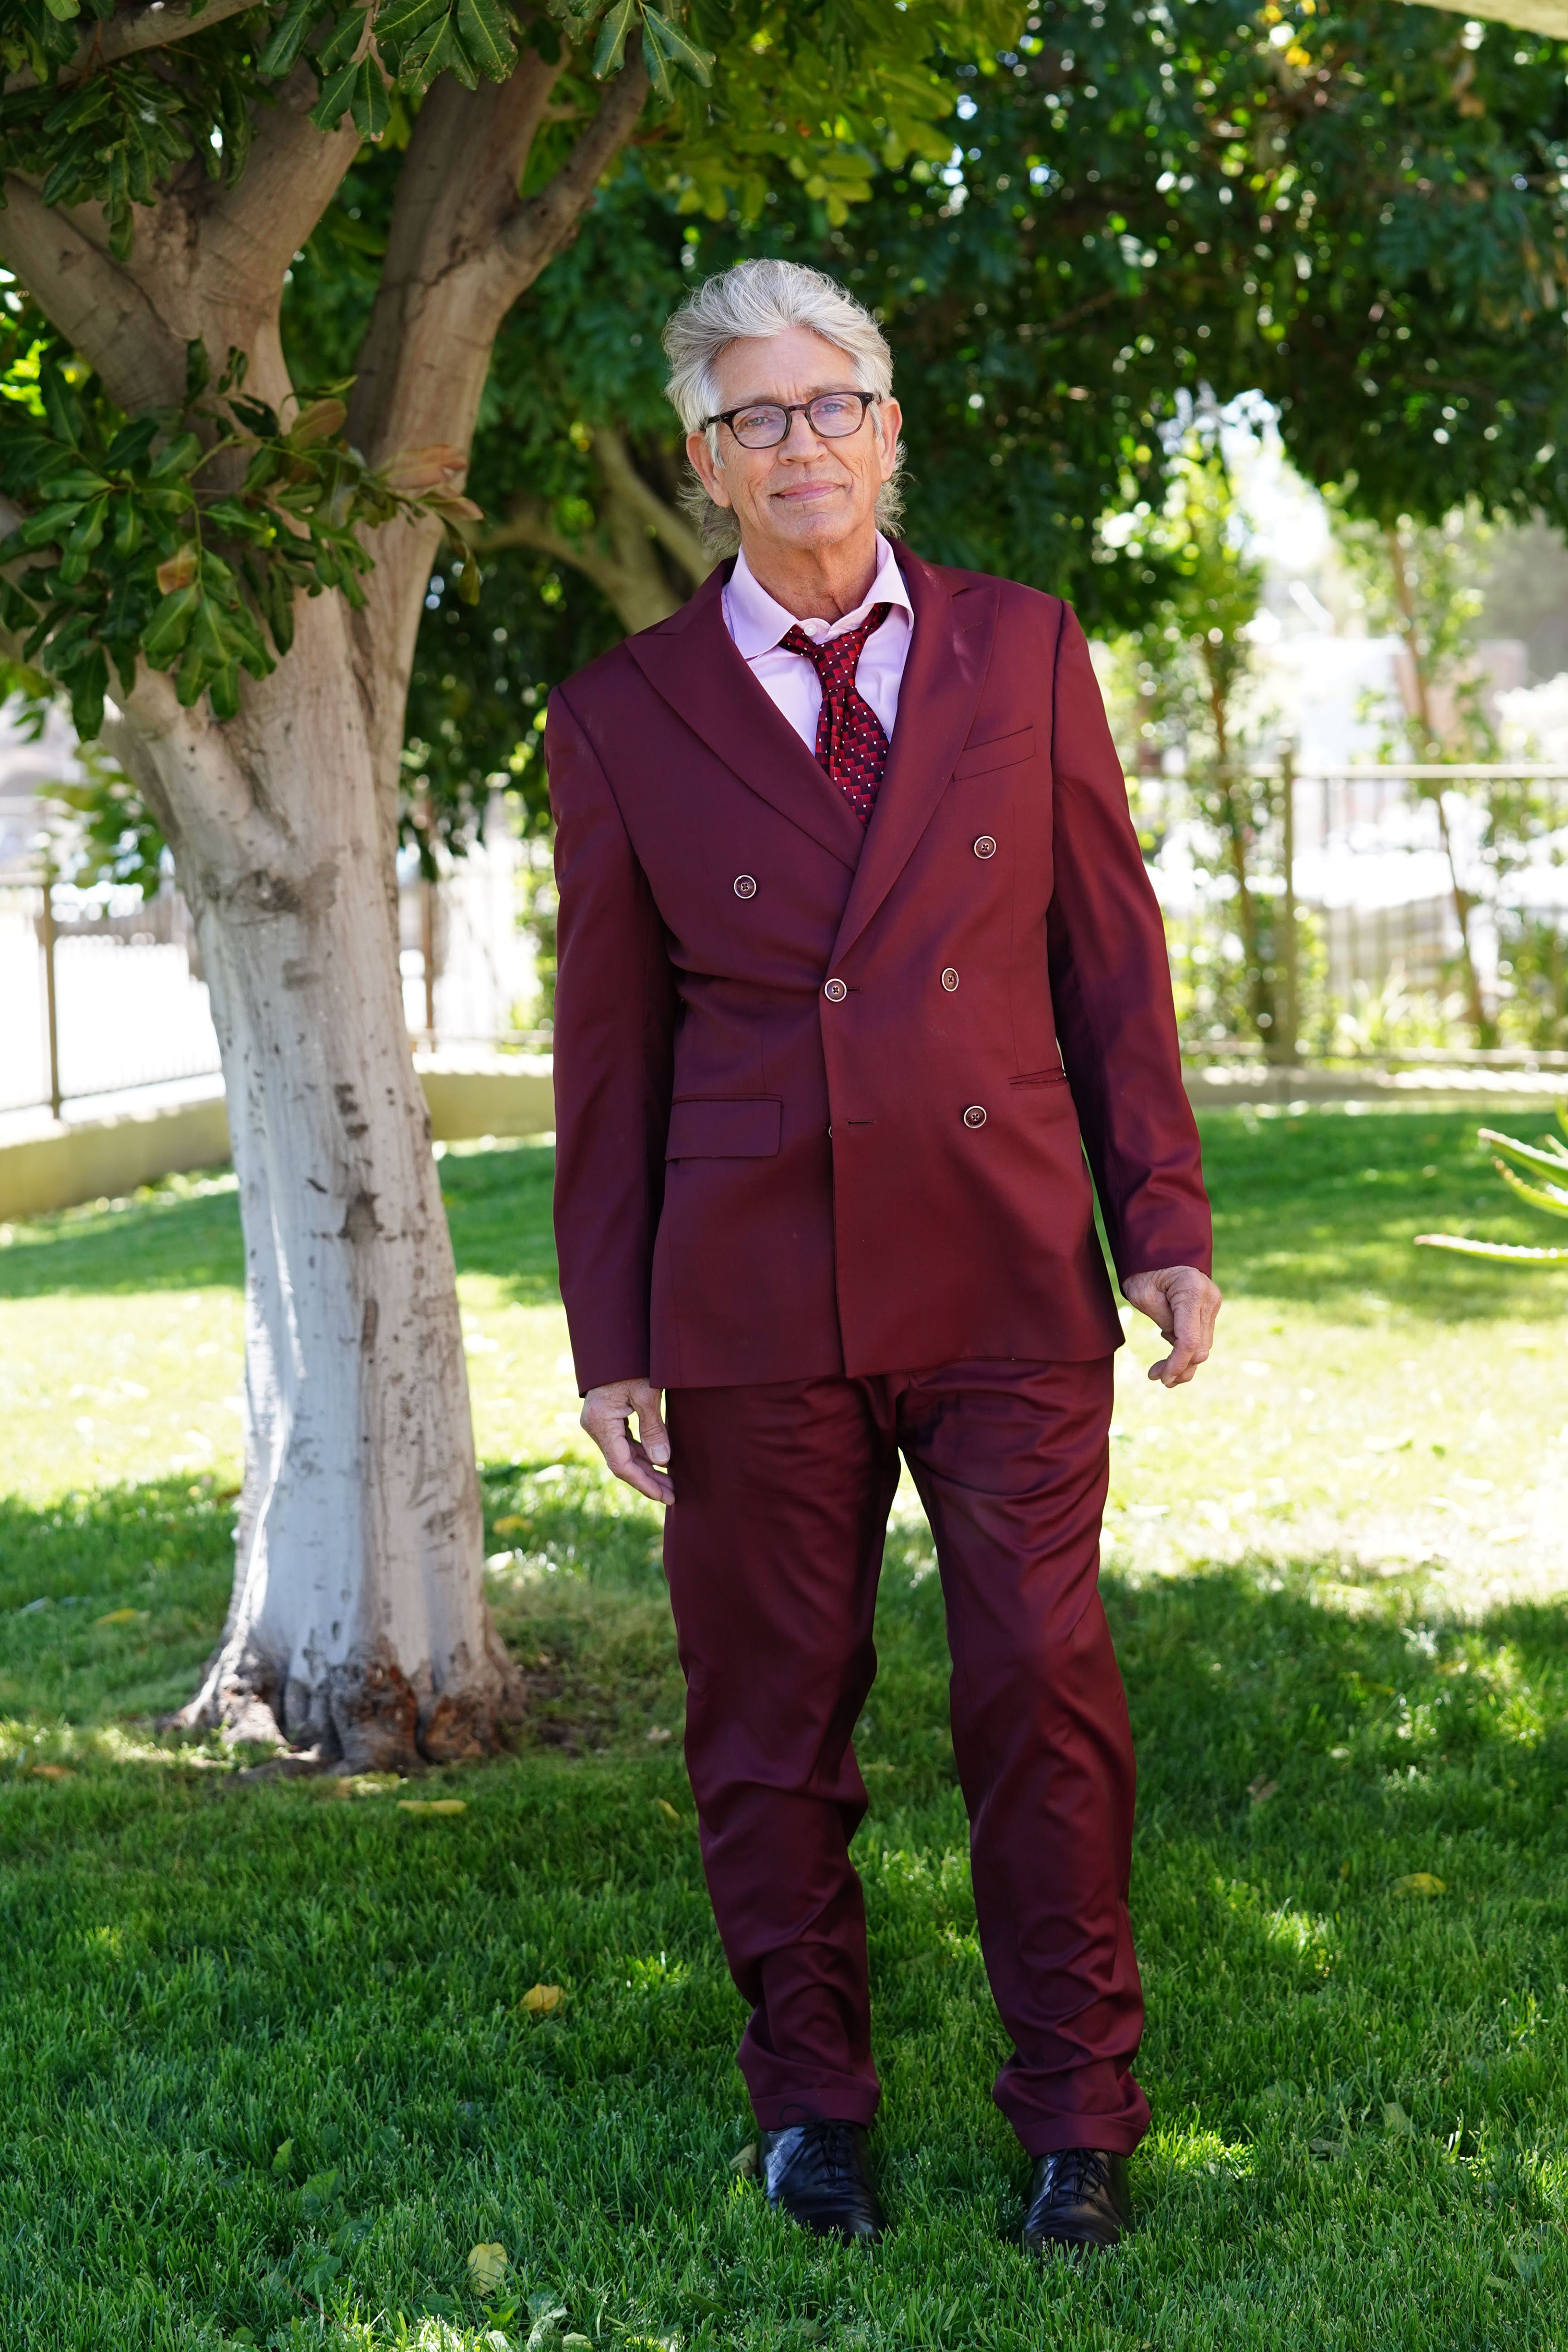 Eric Roberts as seen on April 12, 2022 in Los Angeles, California | Source: Getty Images